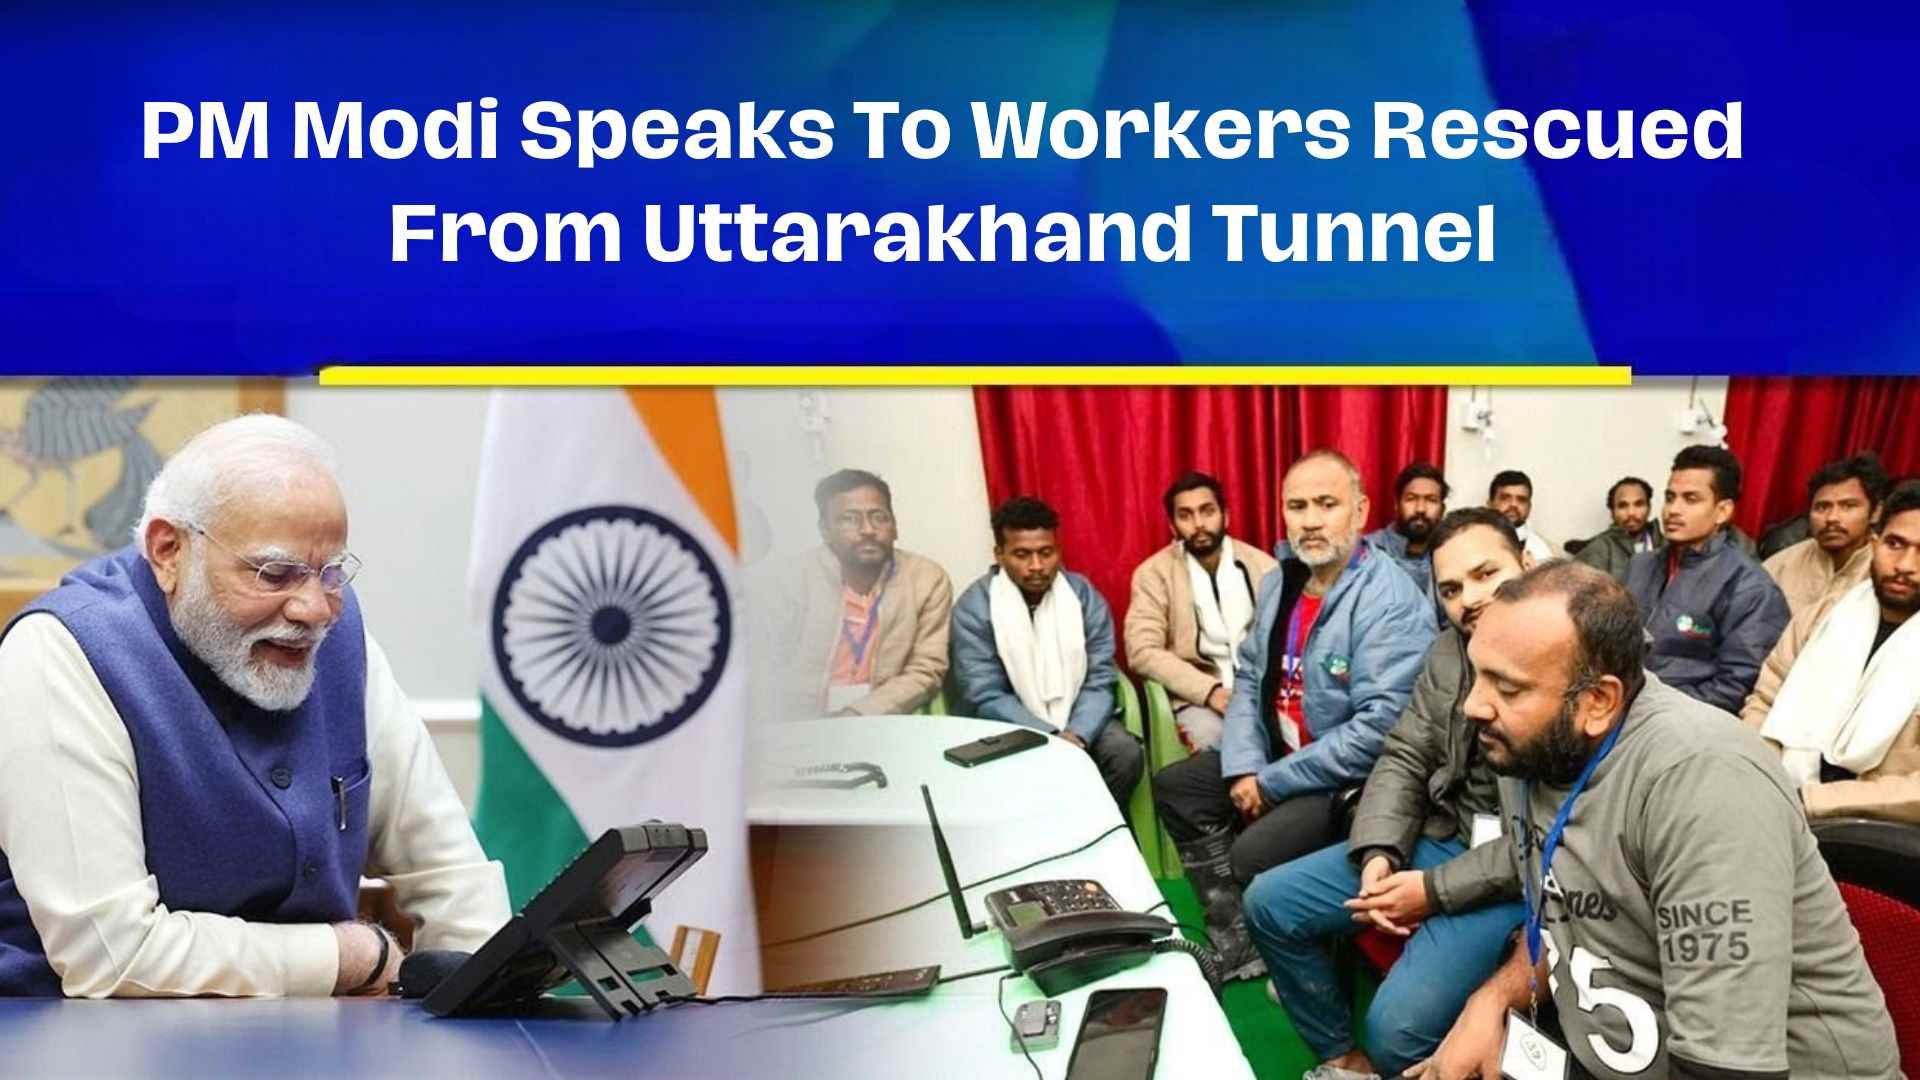 PM Modi Speaks To Workers Rescued From Uttarakhand Tunnel